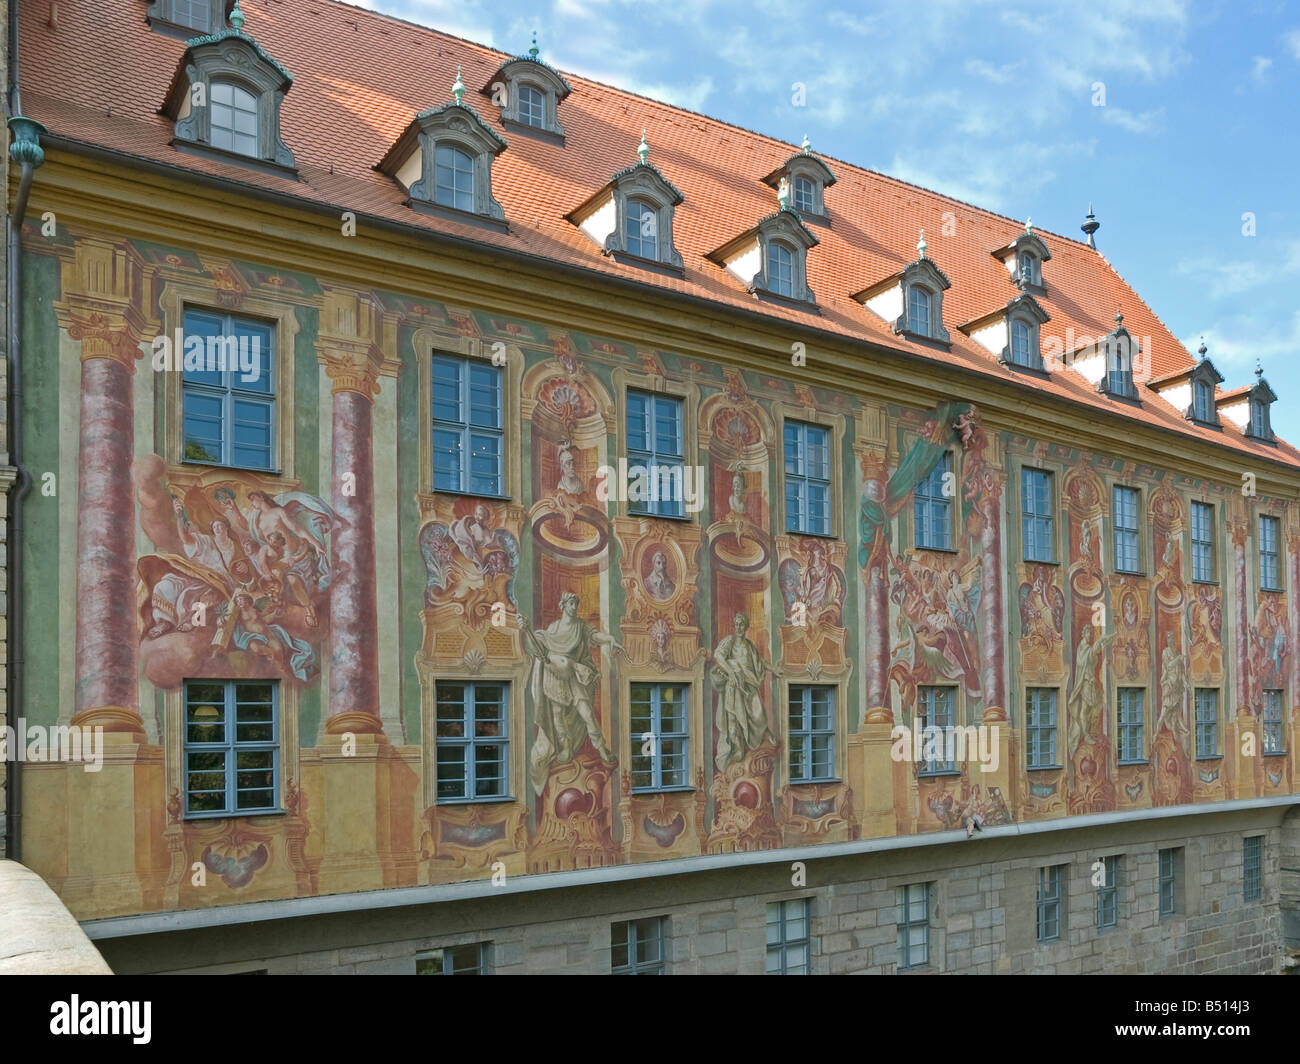 facade of old townhall with history pictures Bamberg Unesco 1993 Bavaria Upper Franconia Germany Stock Photo